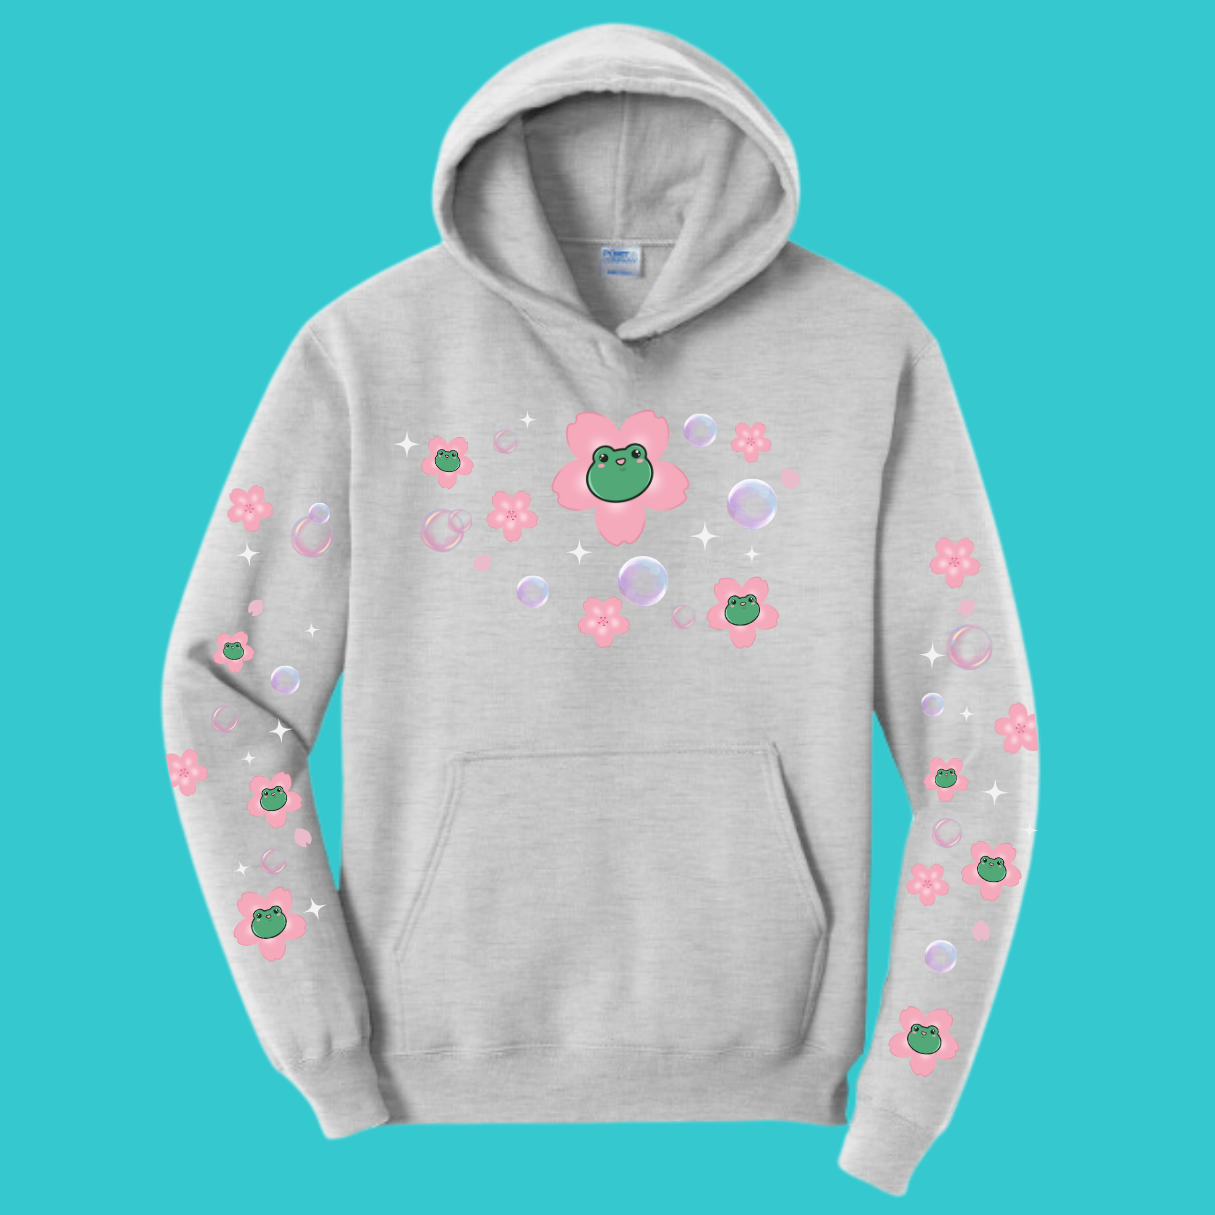 Sakura  Kawaii Frog Sweater Hoodie : Perfect Mother's Day Gift & Fall Winter Essential  .  Trendy, Blossom Style for Your Best Friend